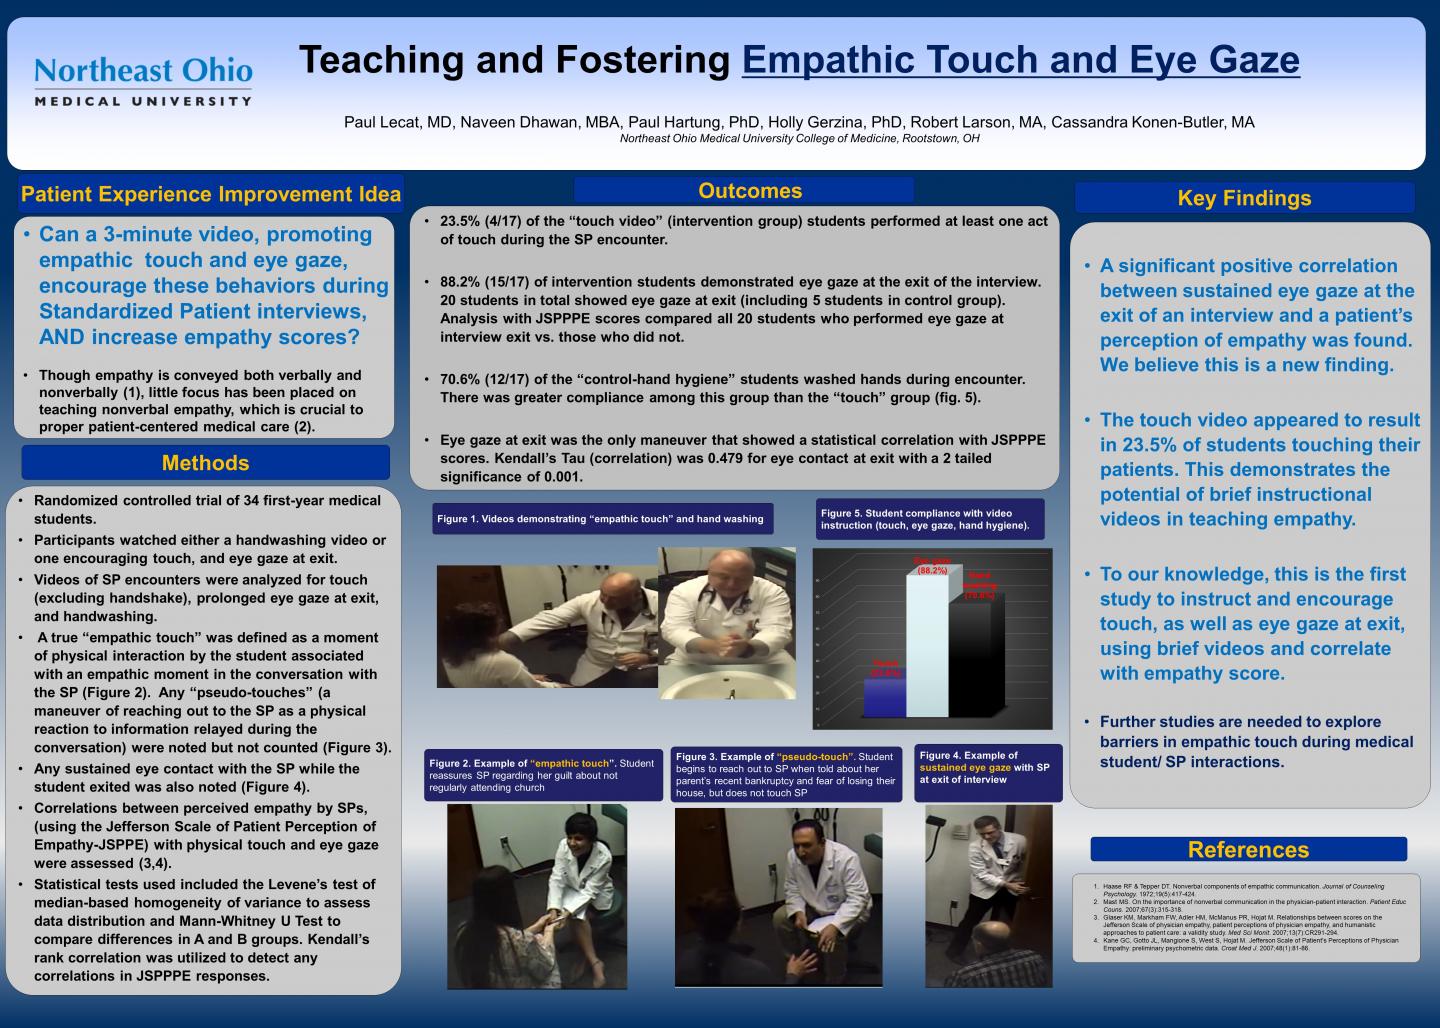 Teaching and Fostering Empathic Touch and Eye Gaze